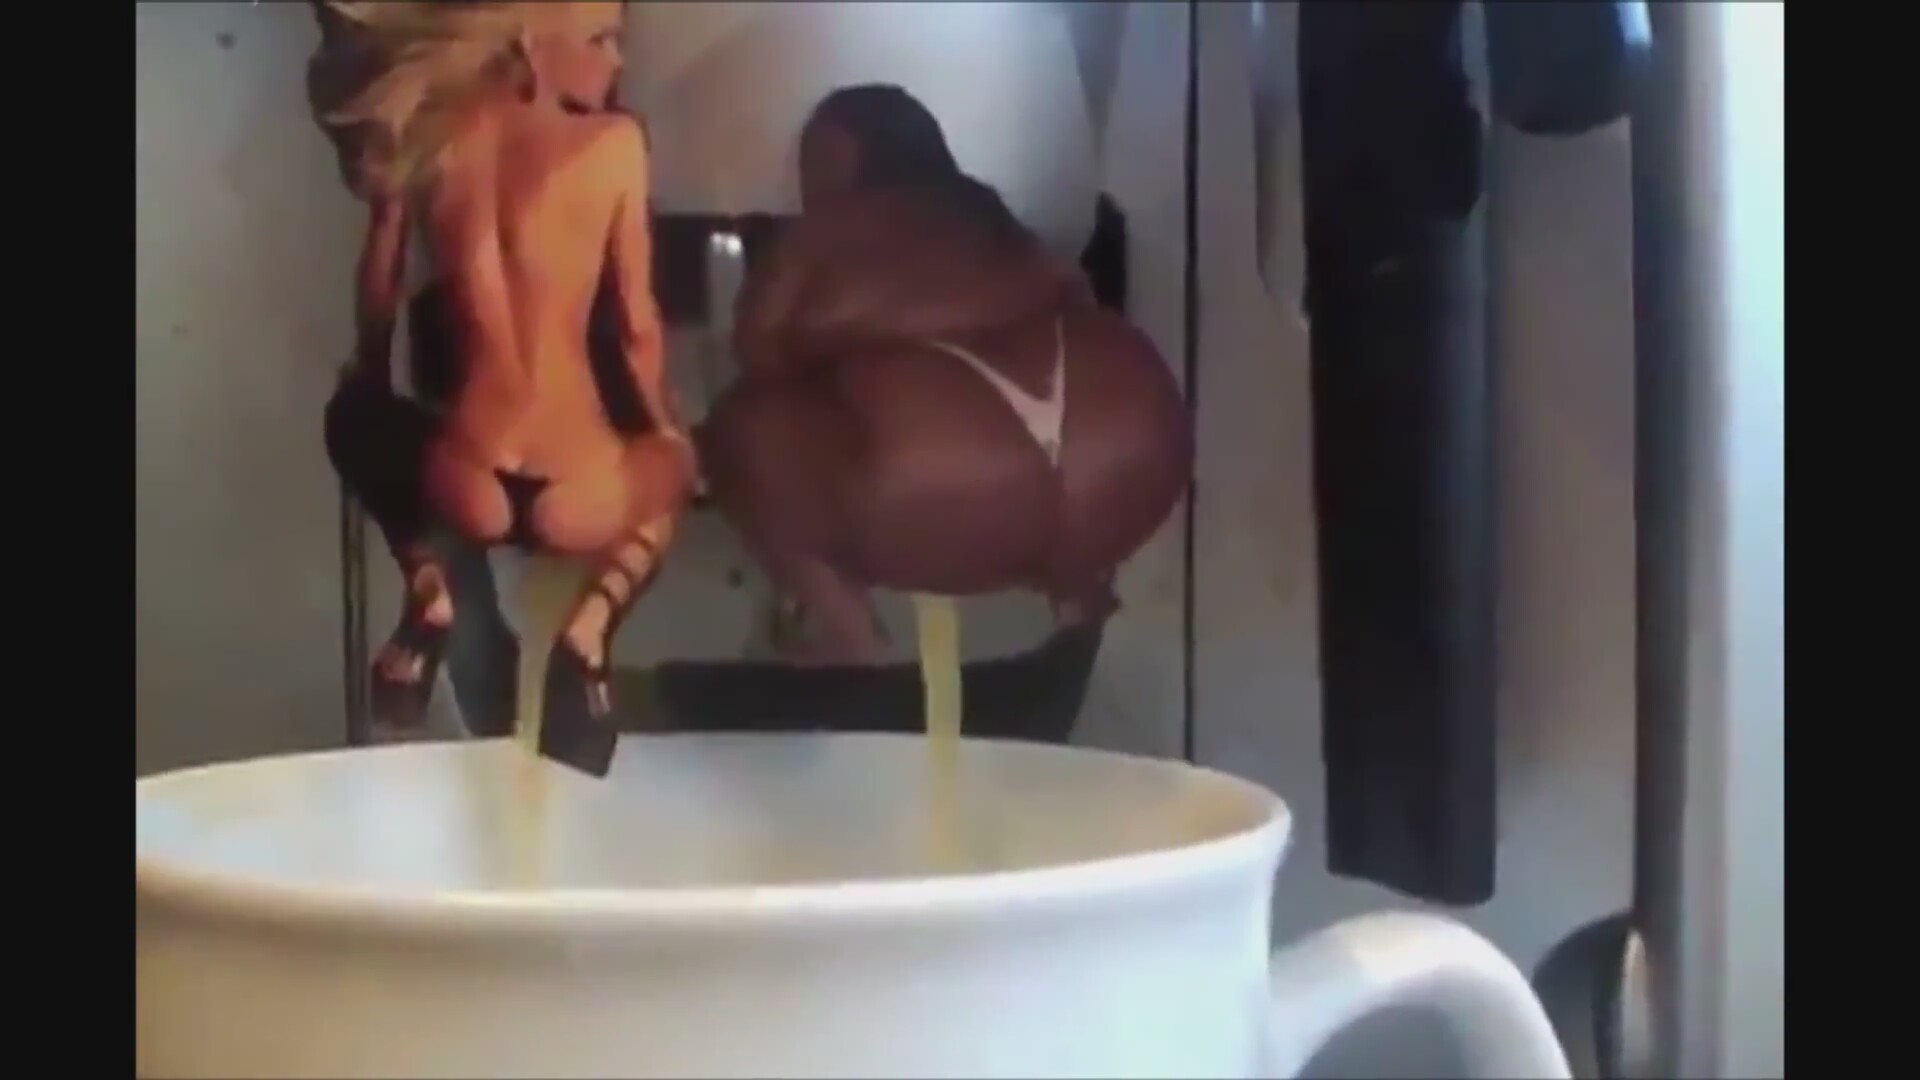 Two girls one cup porno gifs